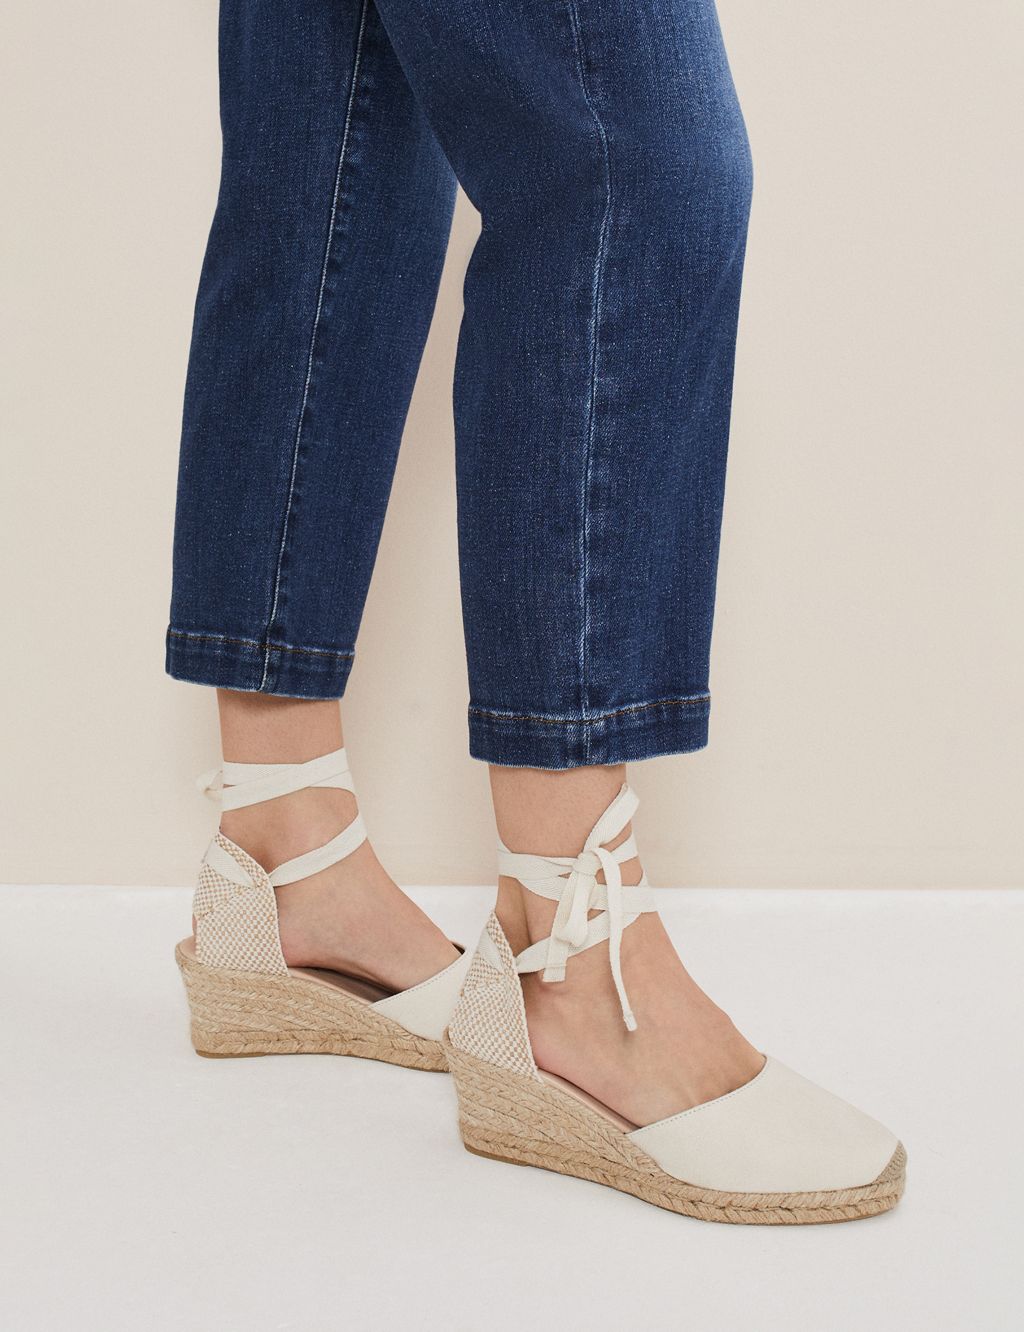 Suede Ankle Strap Wedge Espadrilles image 1